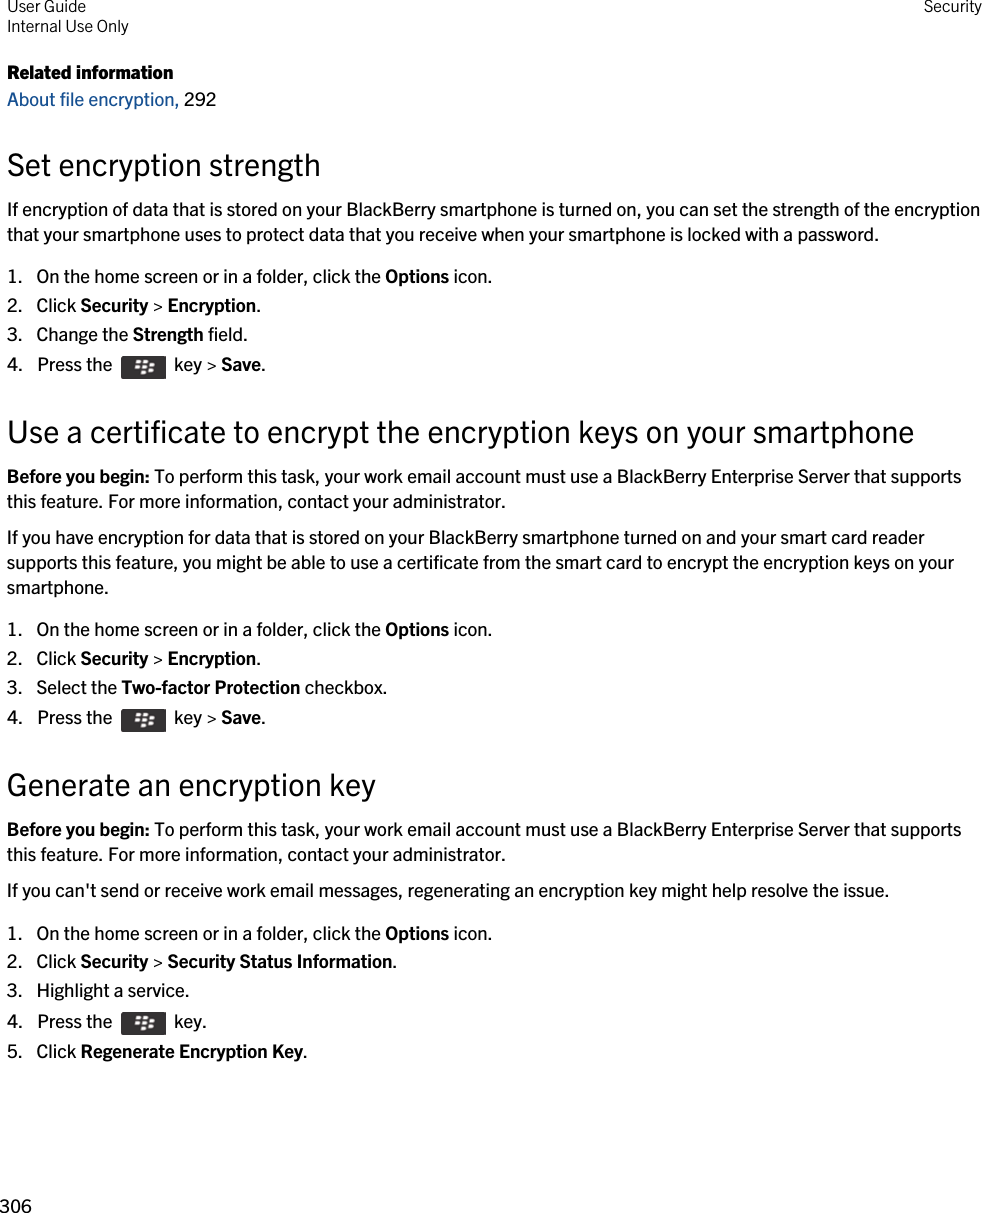 Related informationAbout file encryption, 292 Set encryption strengthIf encryption of data that is stored on your BlackBerry smartphone is turned on, you can set the strength of the encryption that your smartphone uses to protect data that you receive when your smartphone is locked with a password.1. On the home screen or in a folder, click the Options icon.2. Click Security &gt; Encryption.3. Change the Strength field.4.  Press the    key &gt; Save. Use a certificate to encrypt the encryption keys on your smartphoneBefore you begin: To perform this task, your work email account must use a BlackBerry Enterprise Server that supports this feature. For more information, contact your administrator.If you have encryption for data that is stored on your BlackBerry smartphone turned on and your smart card reader supports this feature, you might be able to use a certificate from the smart card to encrypt the encryption keys on your smartphone.1. On the home screen or in a folder, click the Options icon.2. Click Security &gt; Encryption.3. Select the Two-factor Protection checkbox.4.  Press the    key &gt; Save. Generate an encryption keyBefore you begin: To perform this task, your work email account must use a BlackBerry Enterprise Server that supports this feature. For more information, contact your administrator.If you can&apos;t send or receive work email messages, regenerating an encryption key might help resolve the issue.1. On the home screen or in a folder, click the Options icon.2. Click Security &gt; Security Status Information.3. Highlight a service.4.  Press the    key. 5. Click Regenerate Encryption Key.User GuideInternal Use Only Security306 